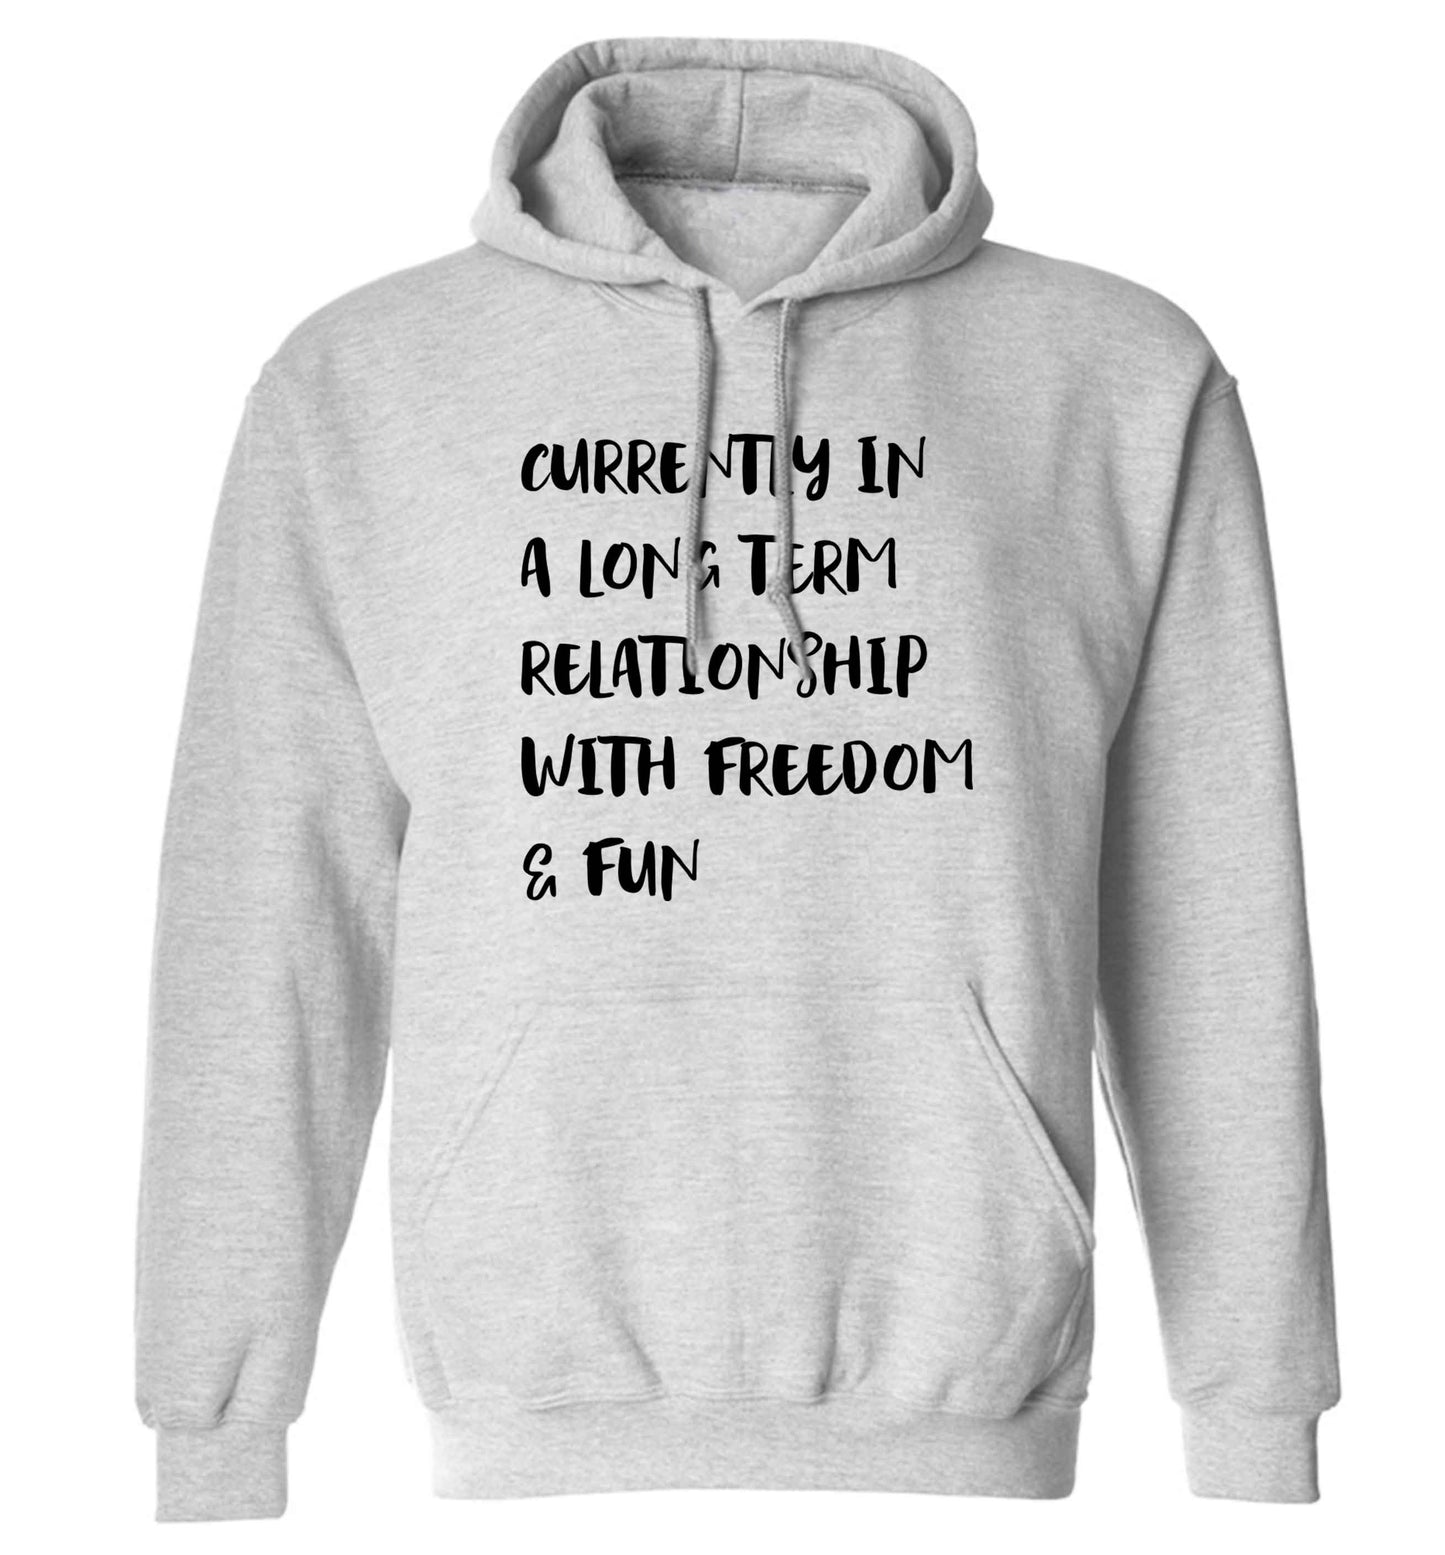 Currently in a long term relationship with freedom and fun adults unisex grey hoodie 2XL